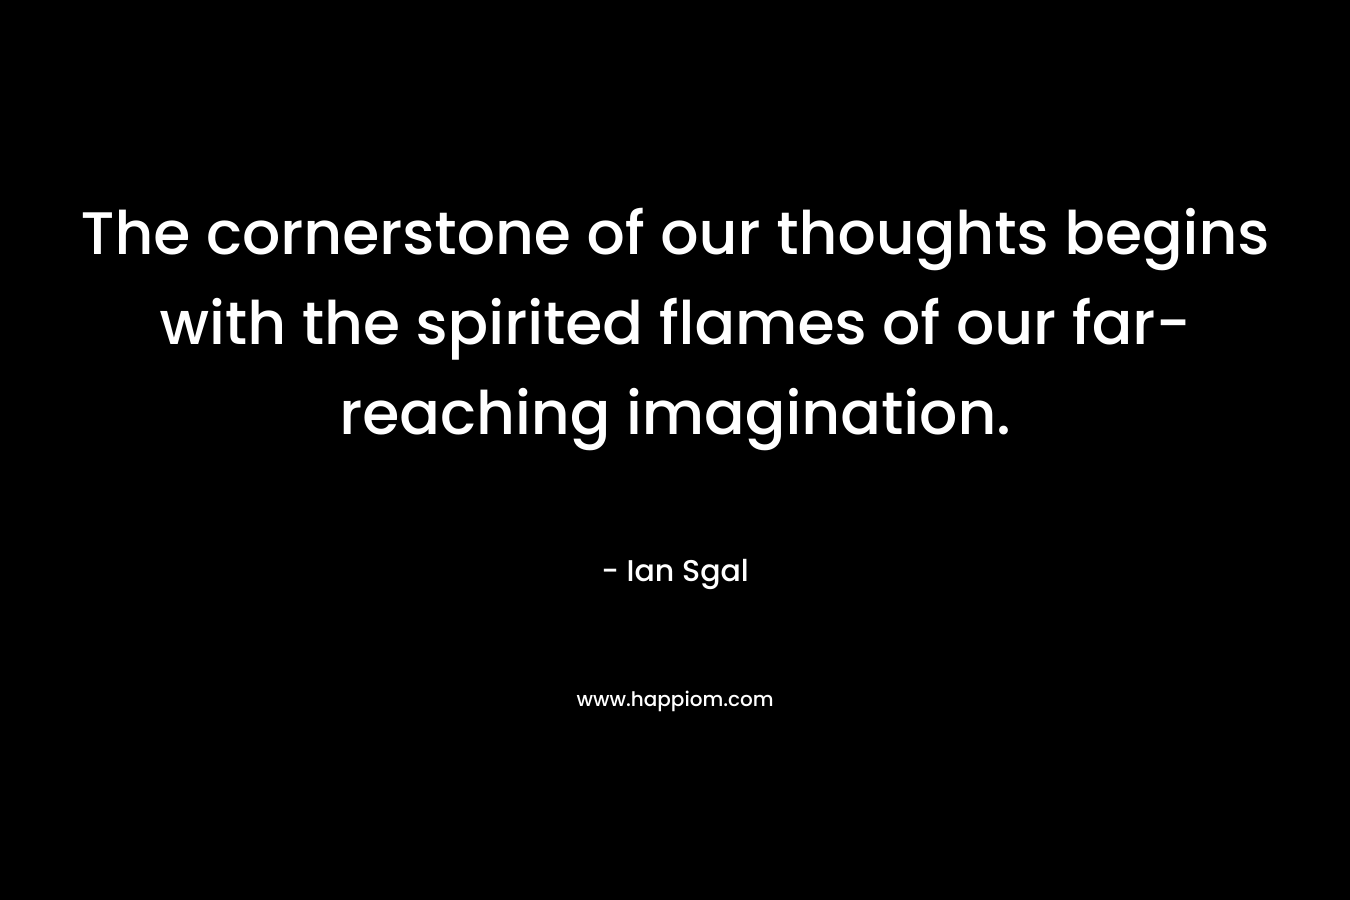 The cornerstone of our thoughts begins with the spirited flames of our far-reaching imagination.